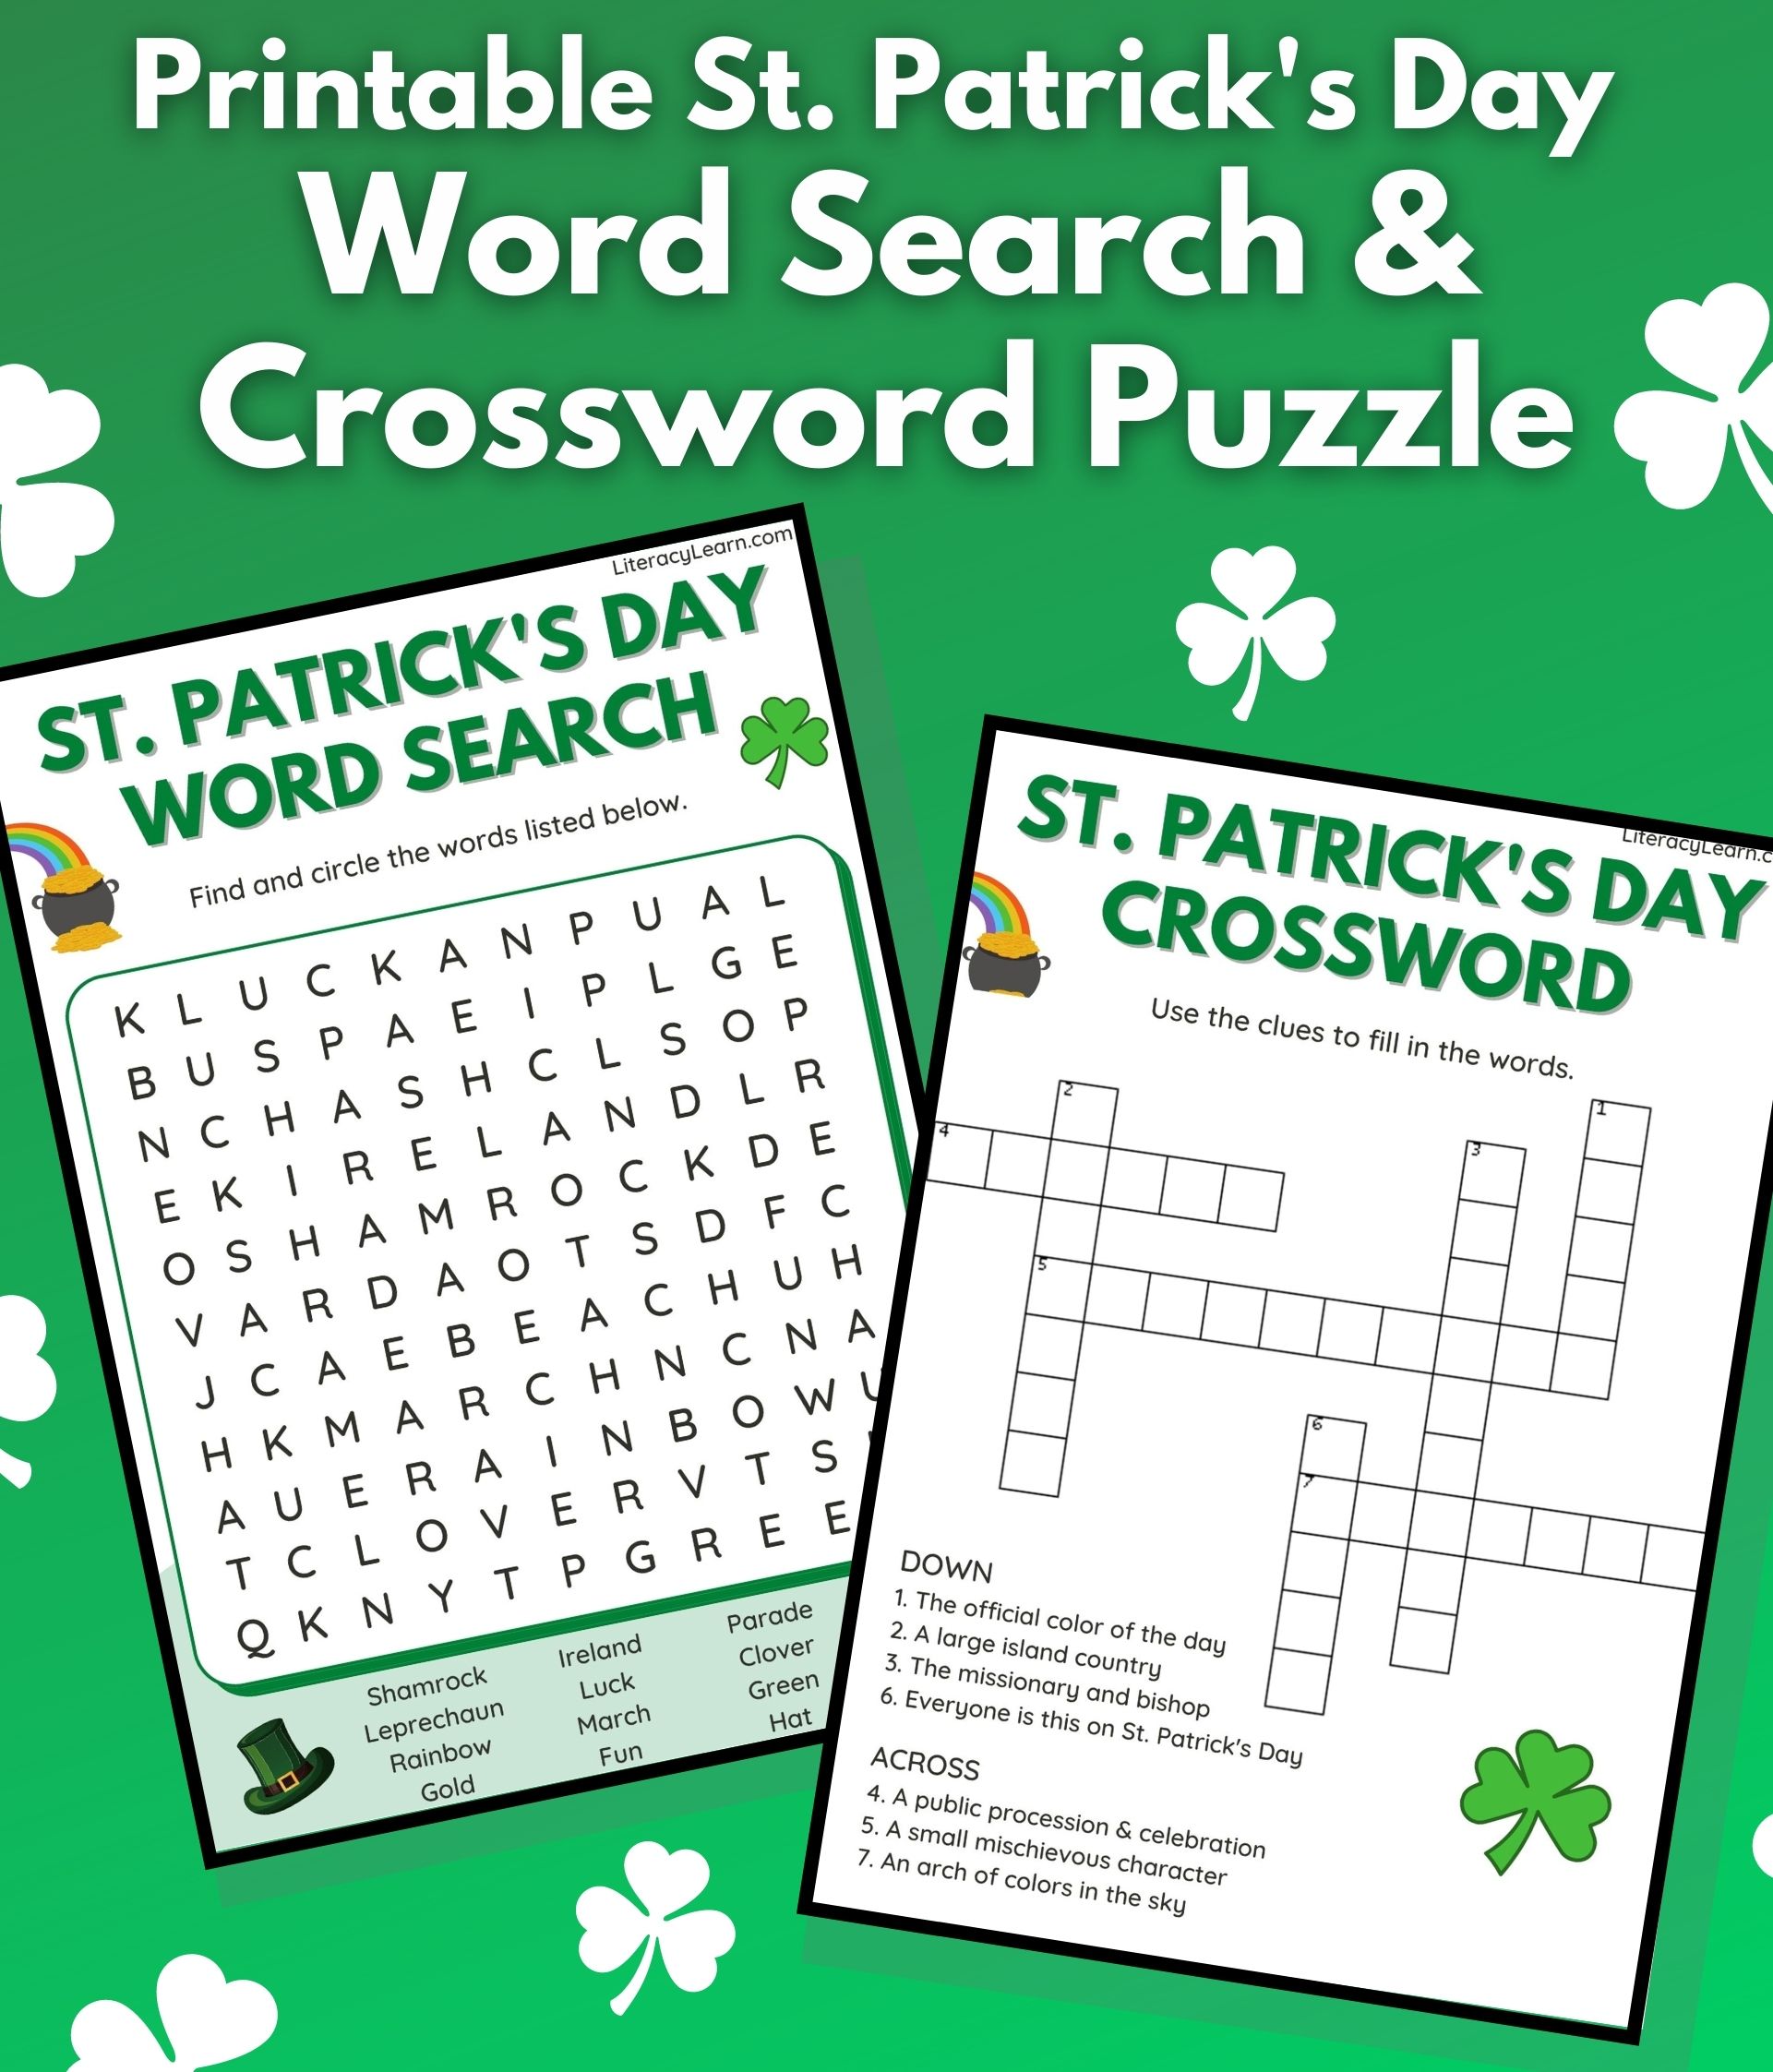 Graphic with the word search and crossword pdfs on a bright green background.